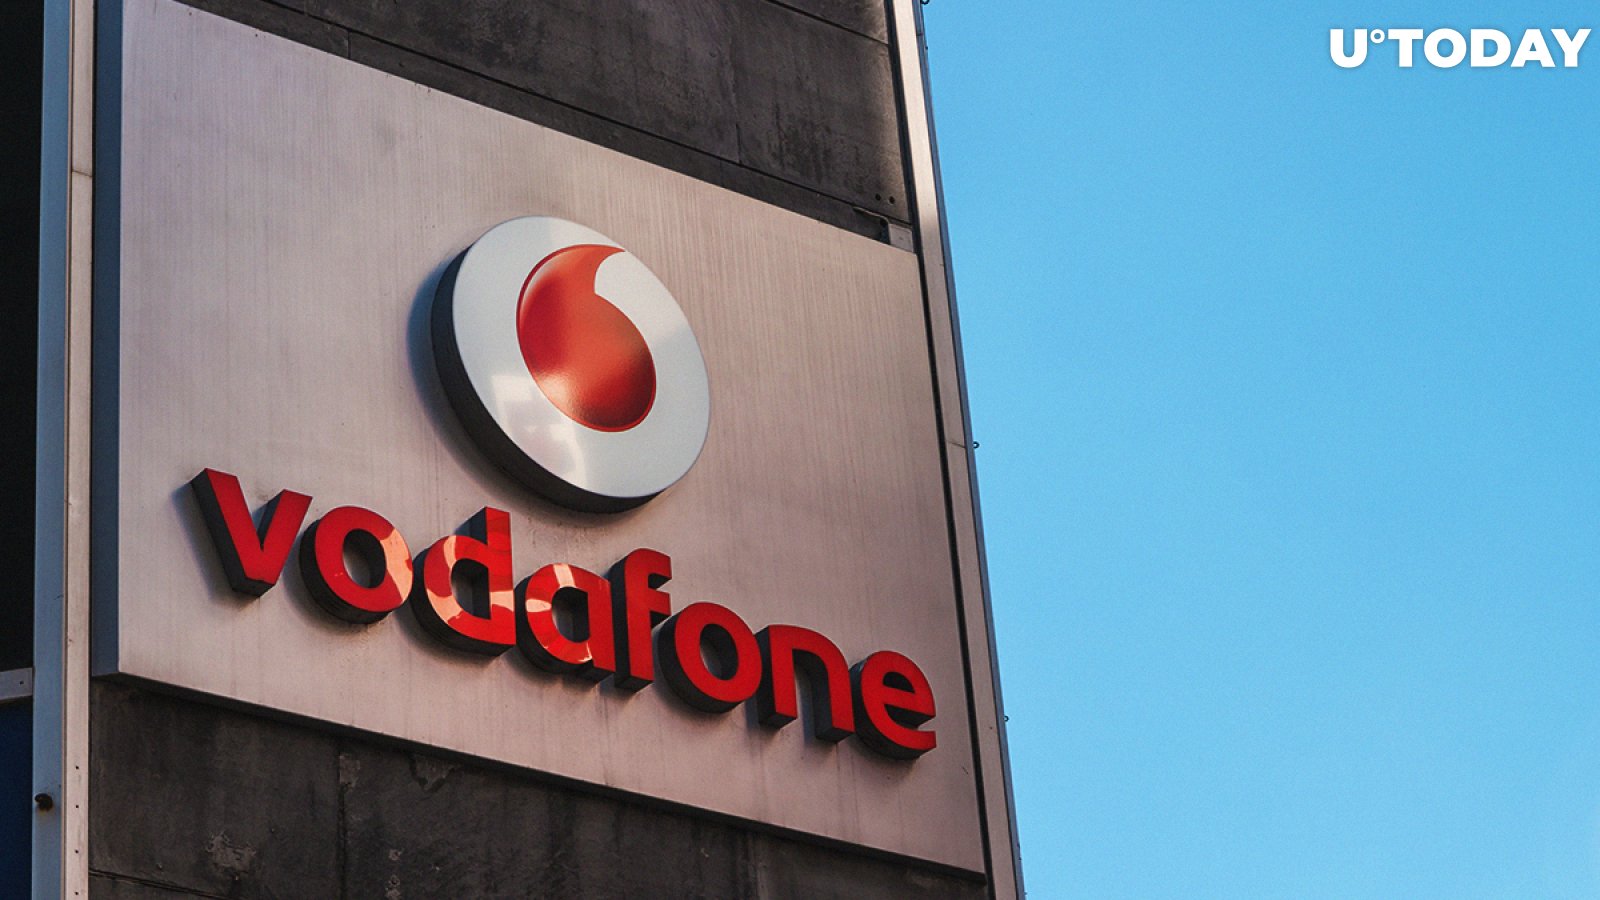 Bitcoin Featured in New Vodafone Ad: Details